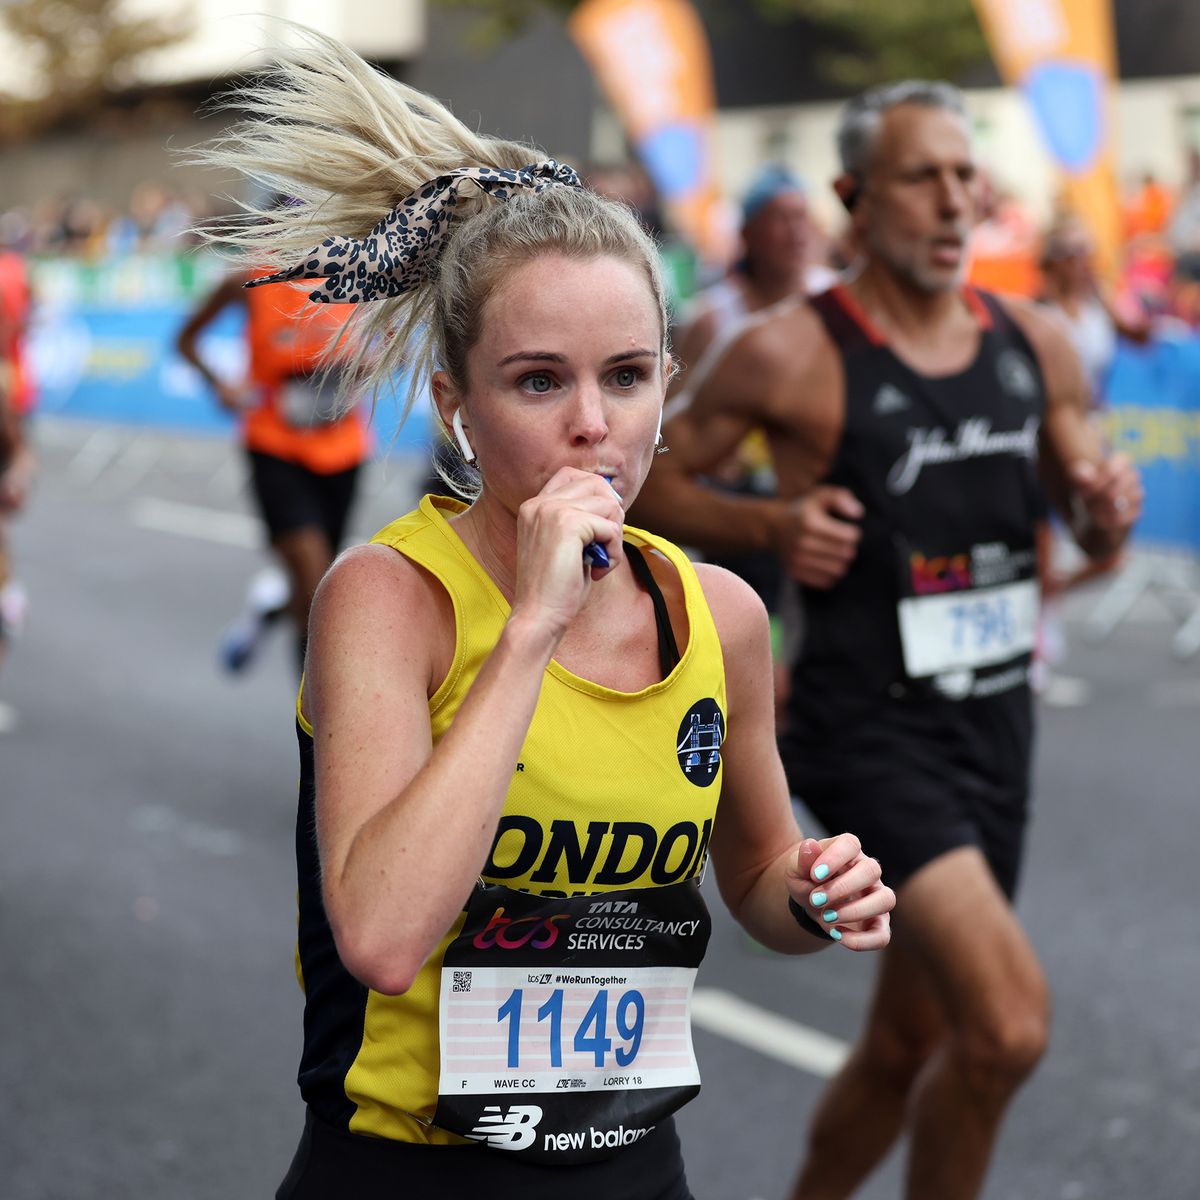 How Gaining Weight Helped Me Run Half Marathons Faster Than Ever